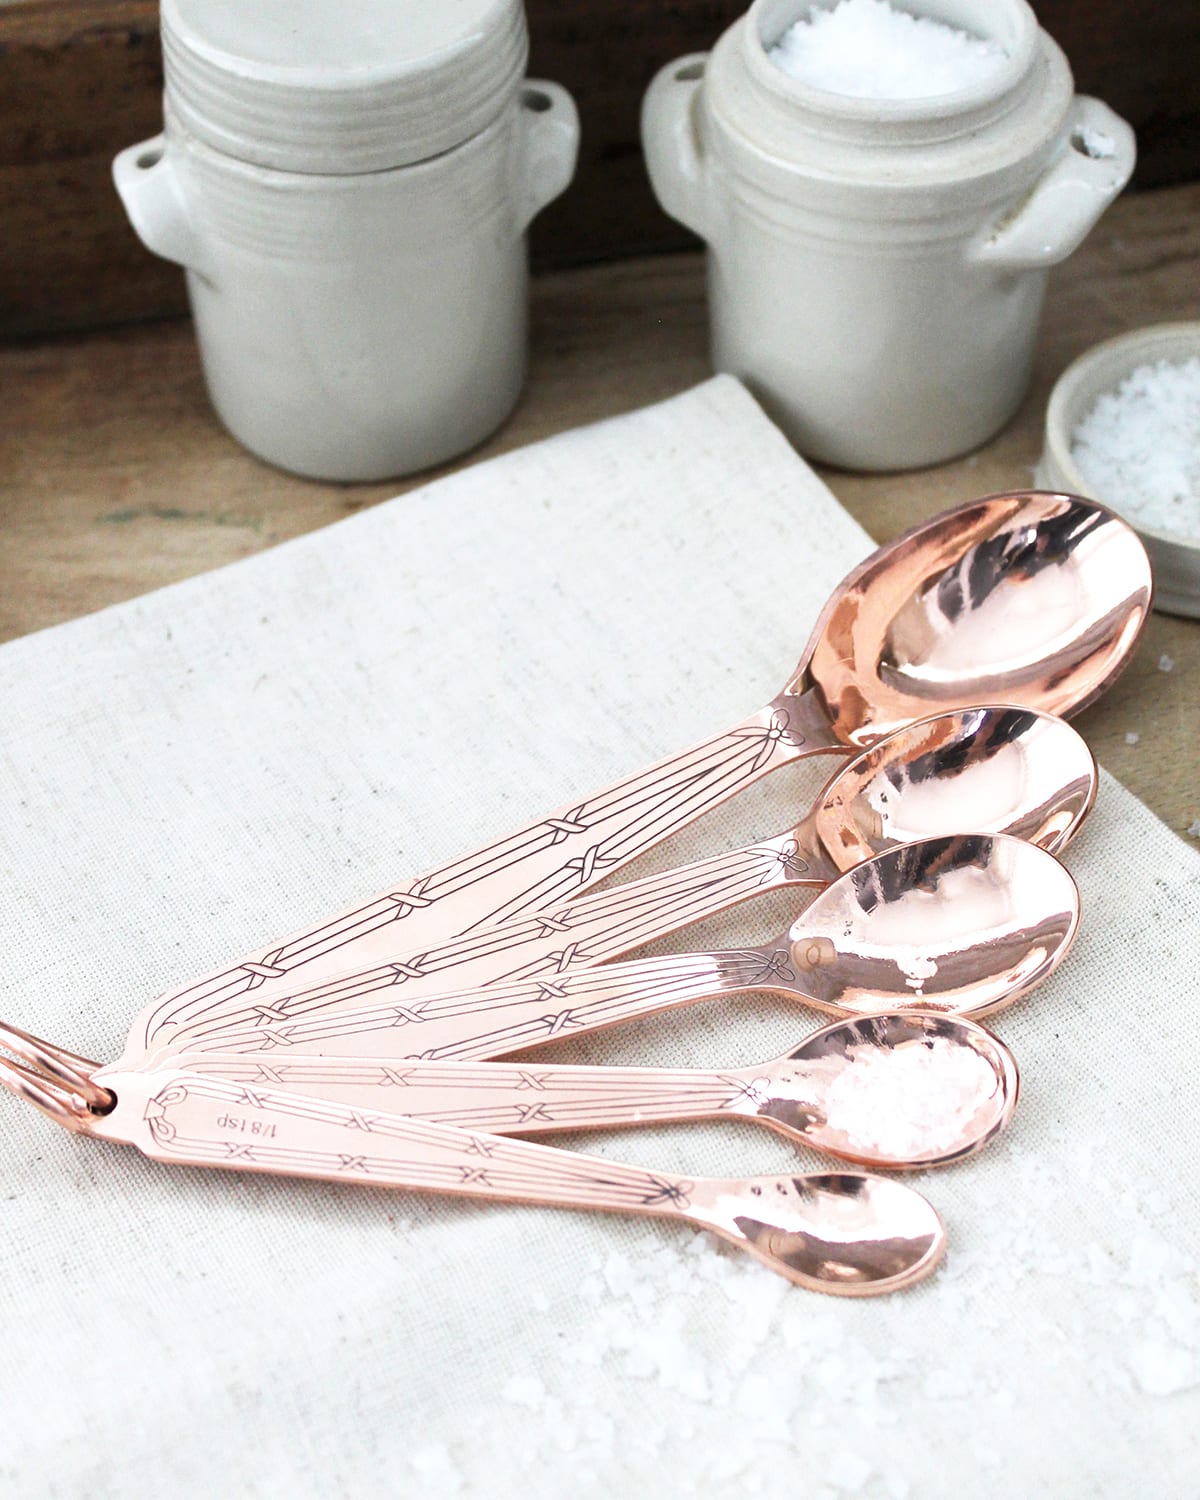 Shop Coppermill Kitchen Vintage Inspired Measuring Spoons Set In Copper